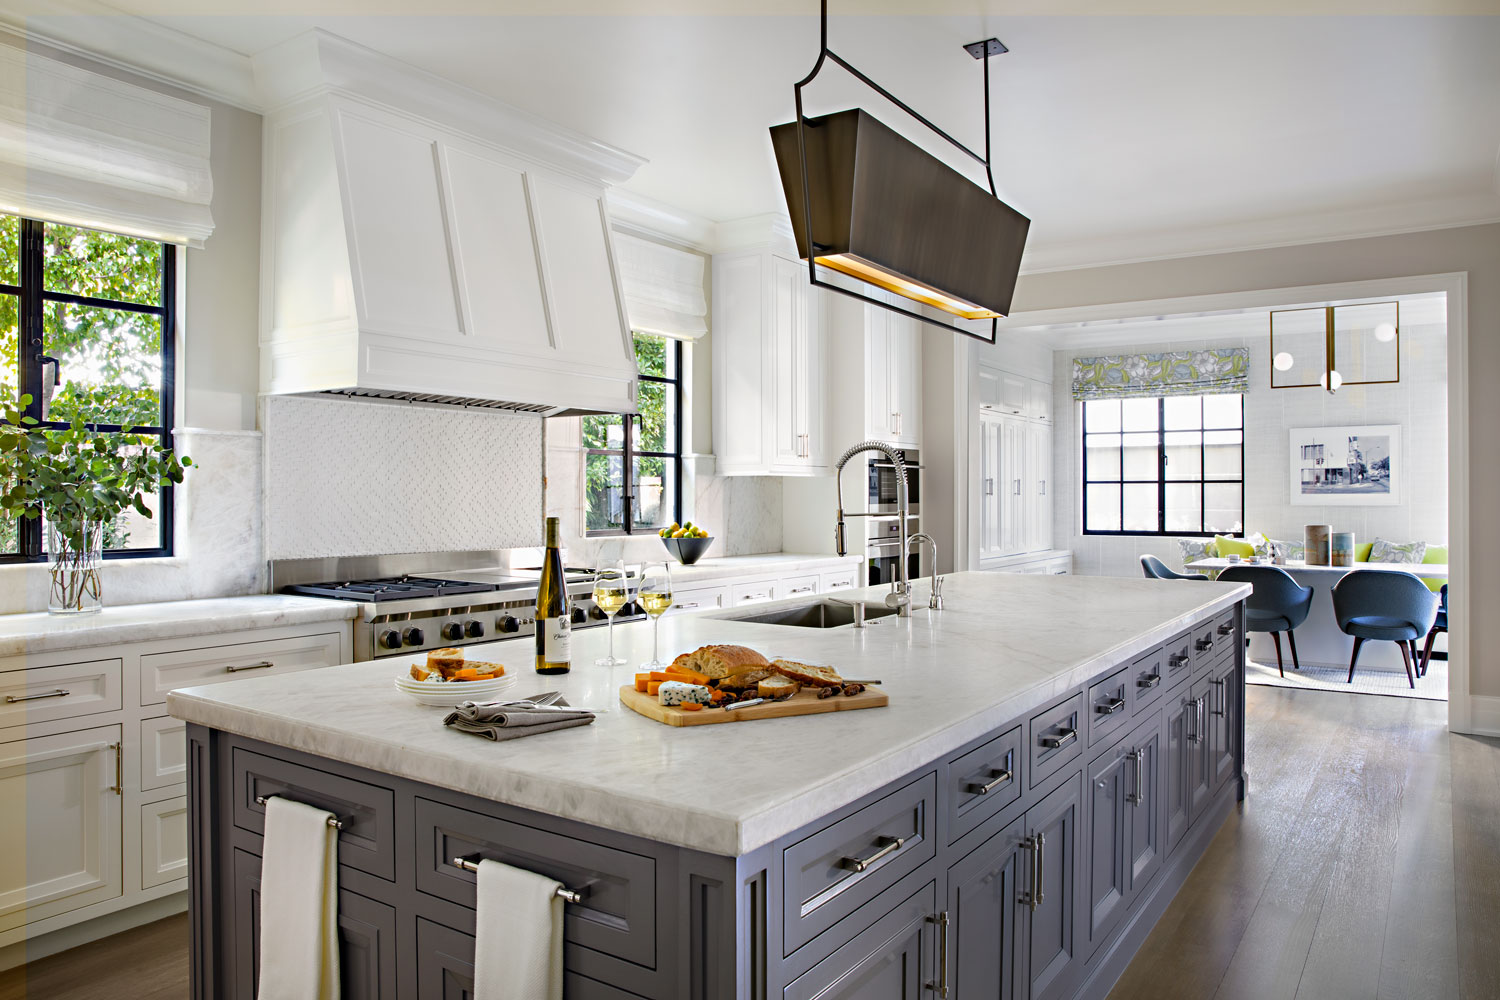 10-chefs-kitchen-marble-countertops-island-gary-drake-general-contractor.jpg